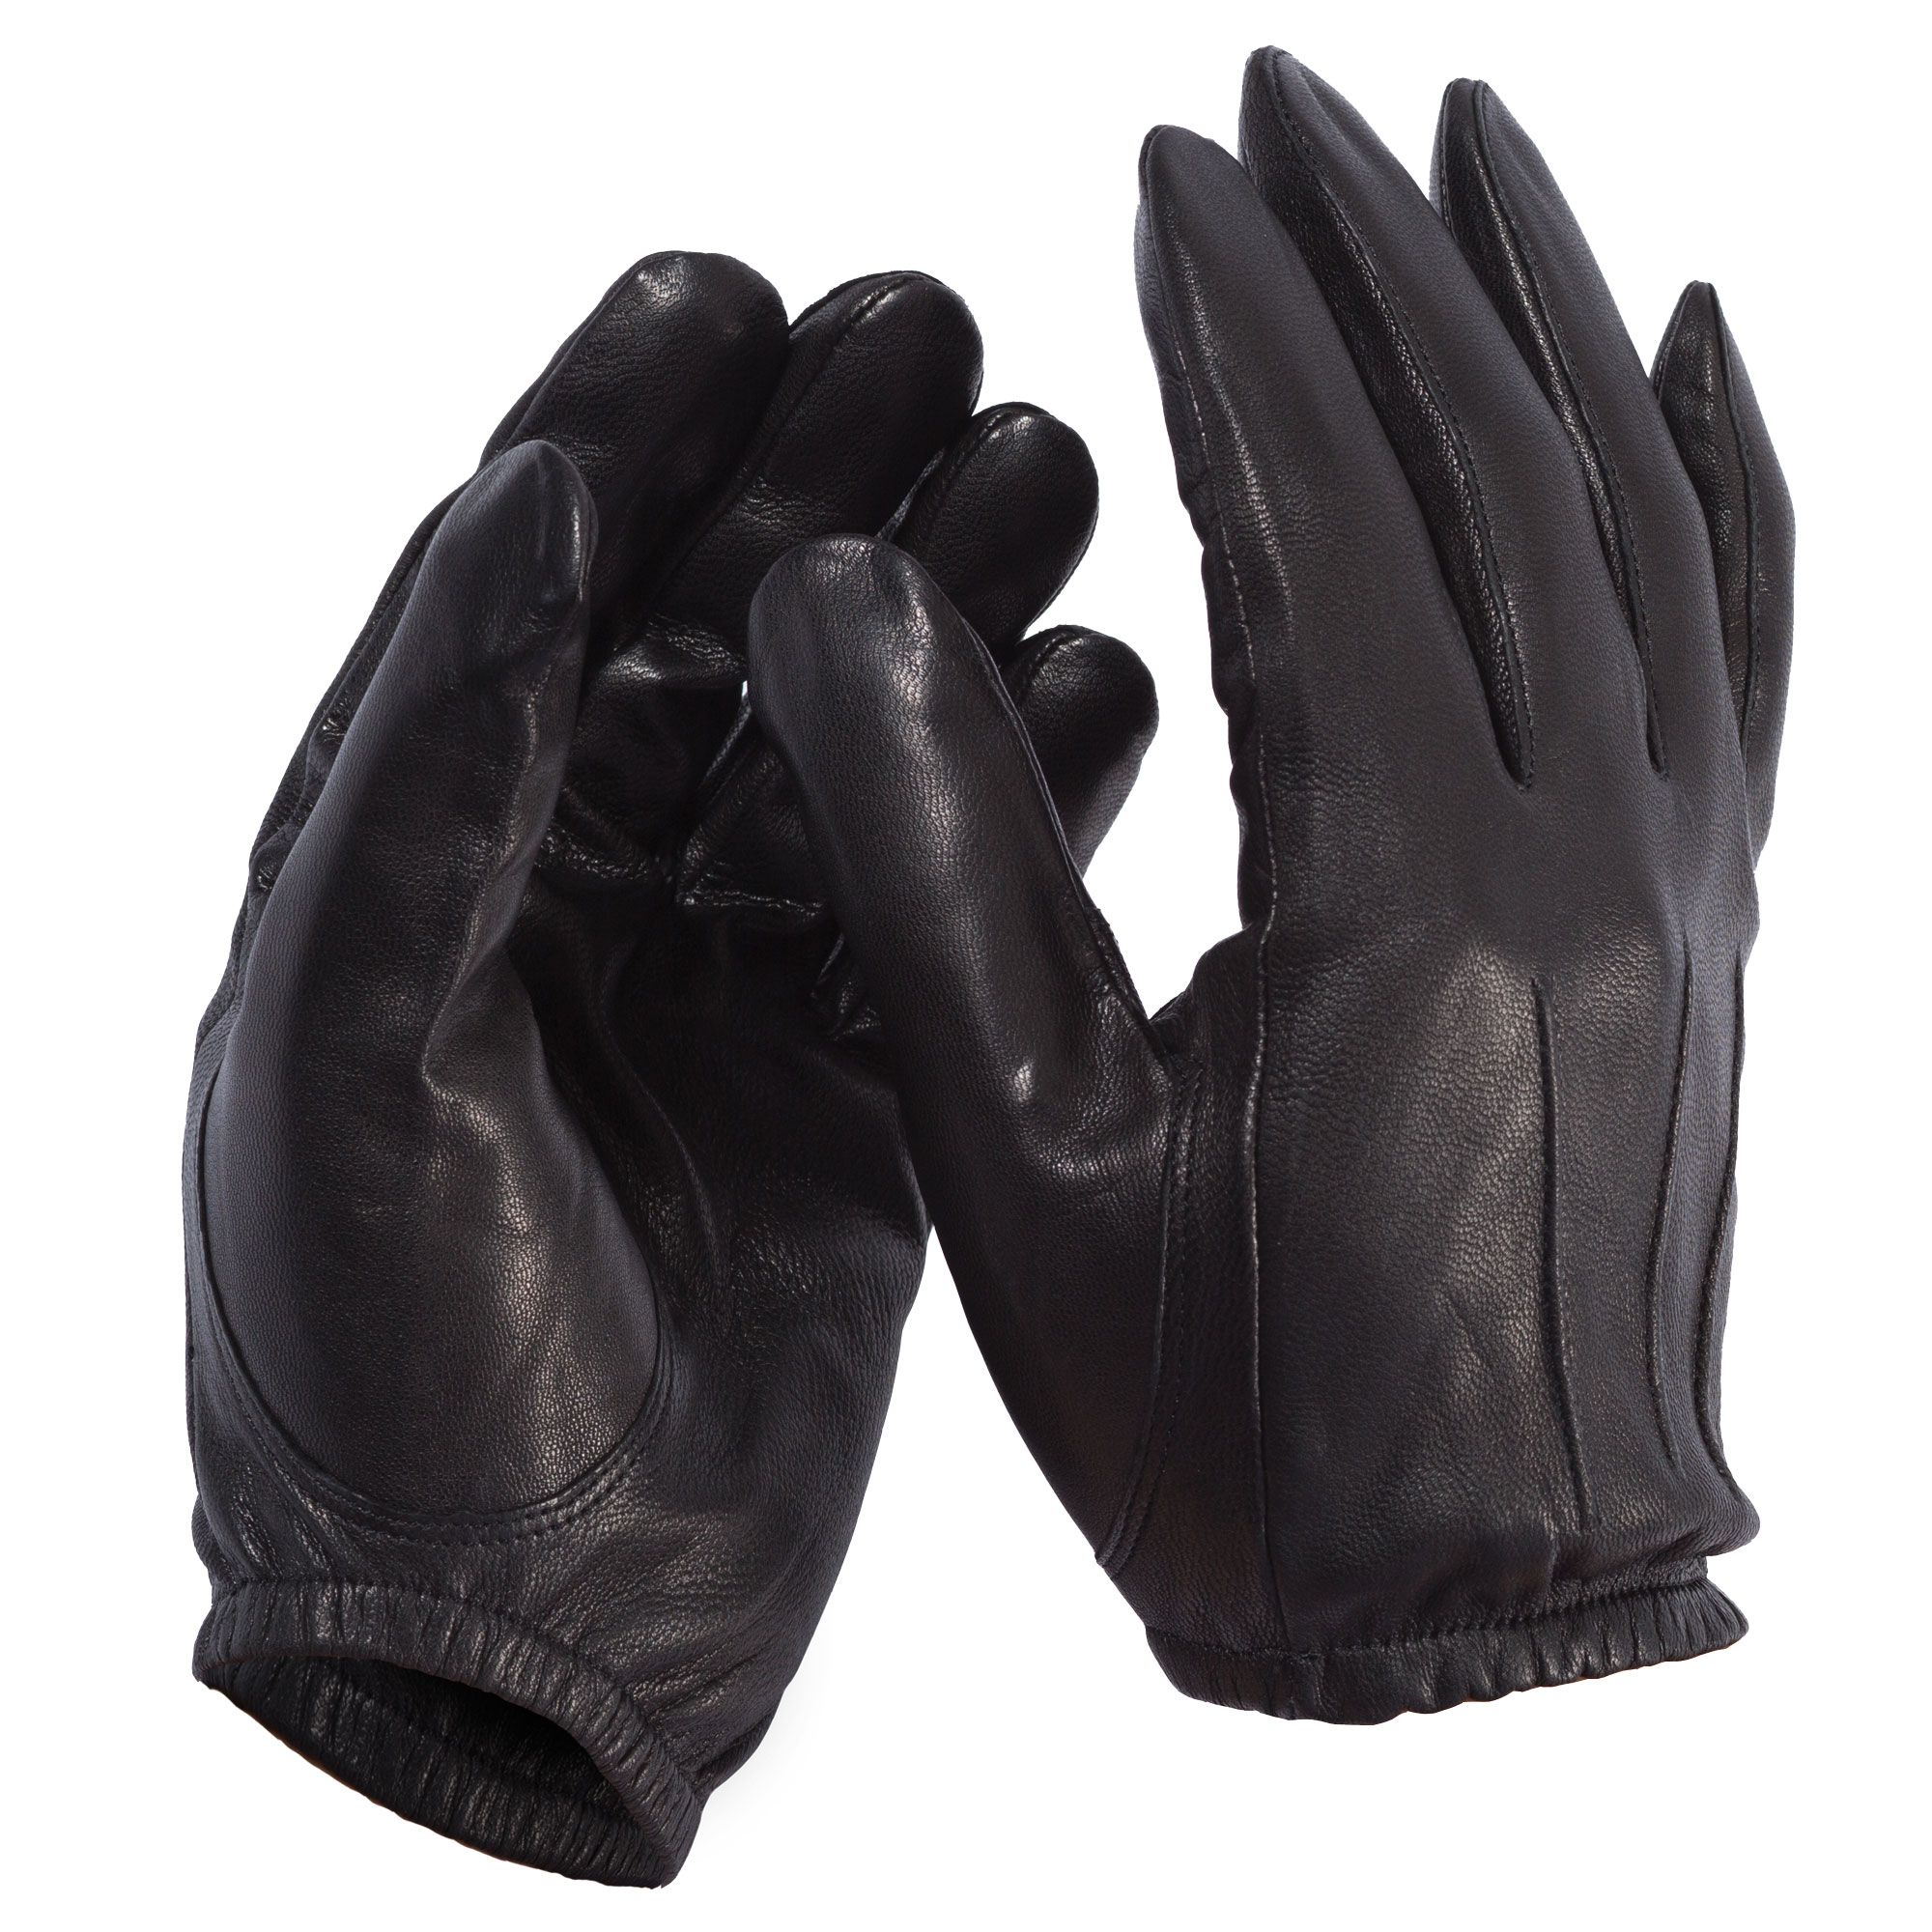 Gloves, Leather Duty